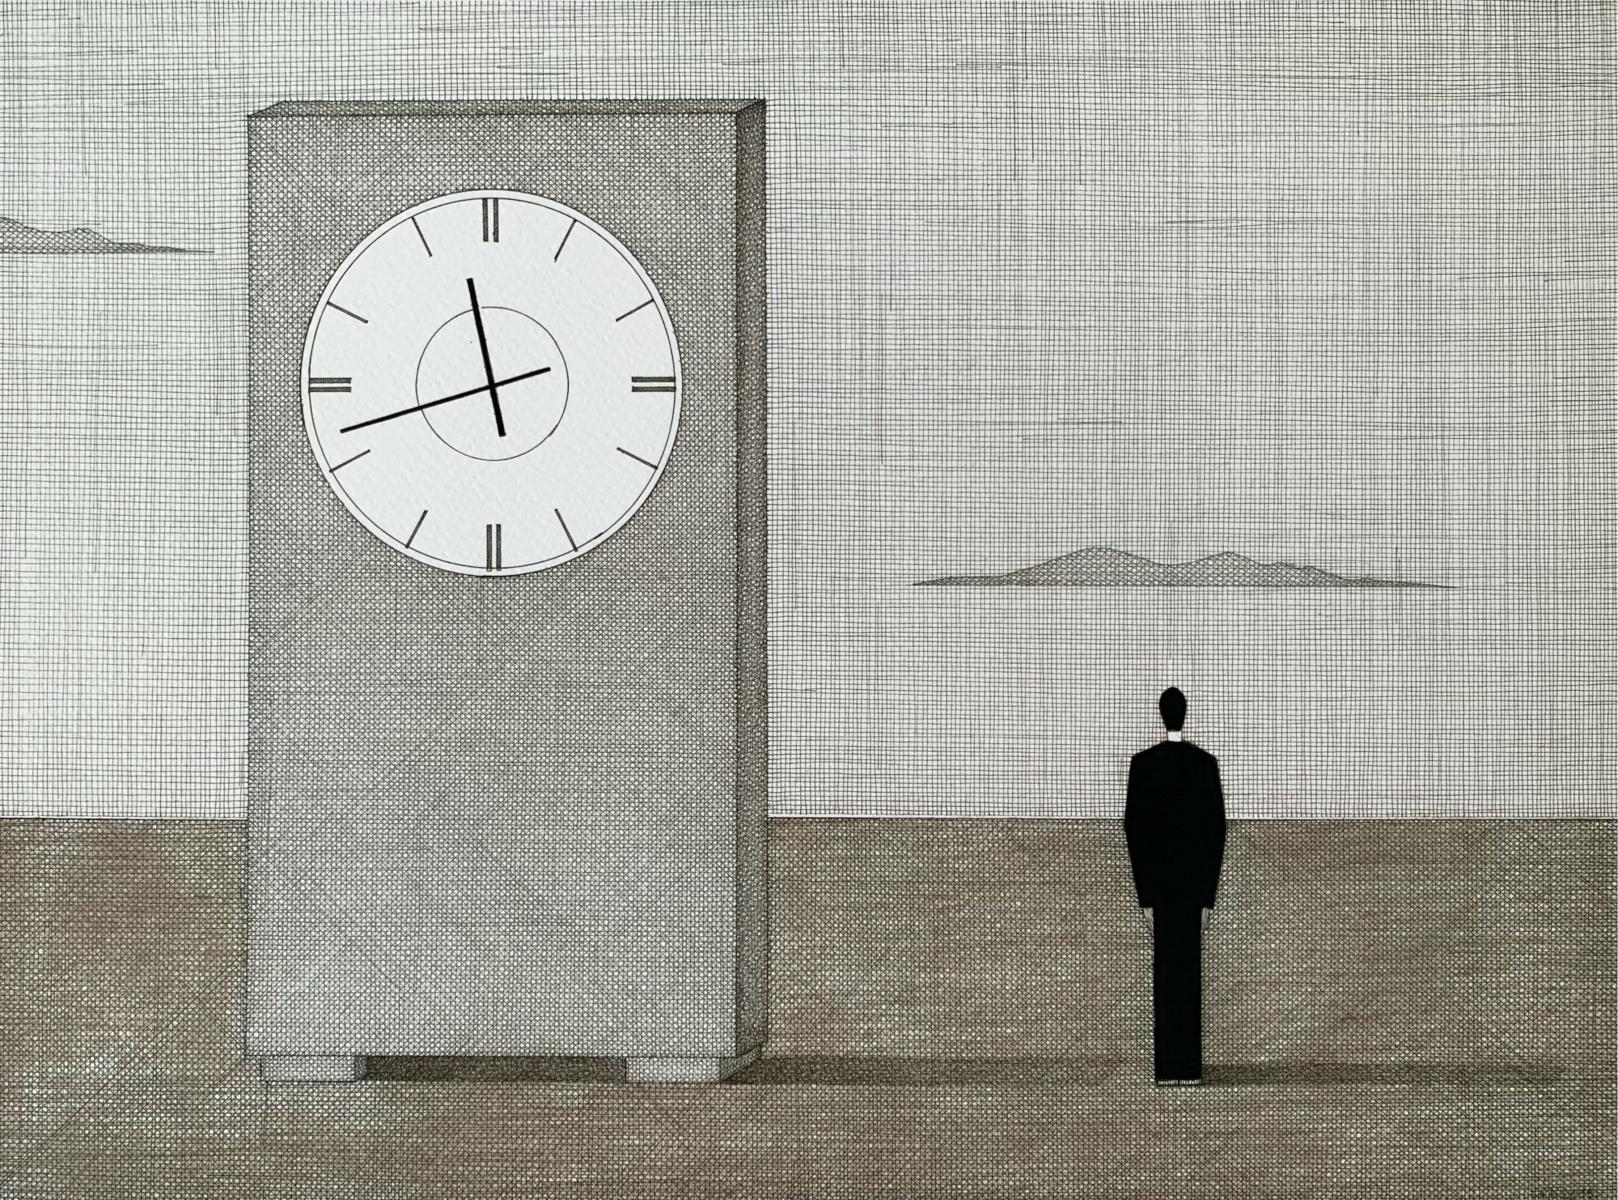 Before a meeting - Figurative print, Surrealism, Minimalism, Muted colors